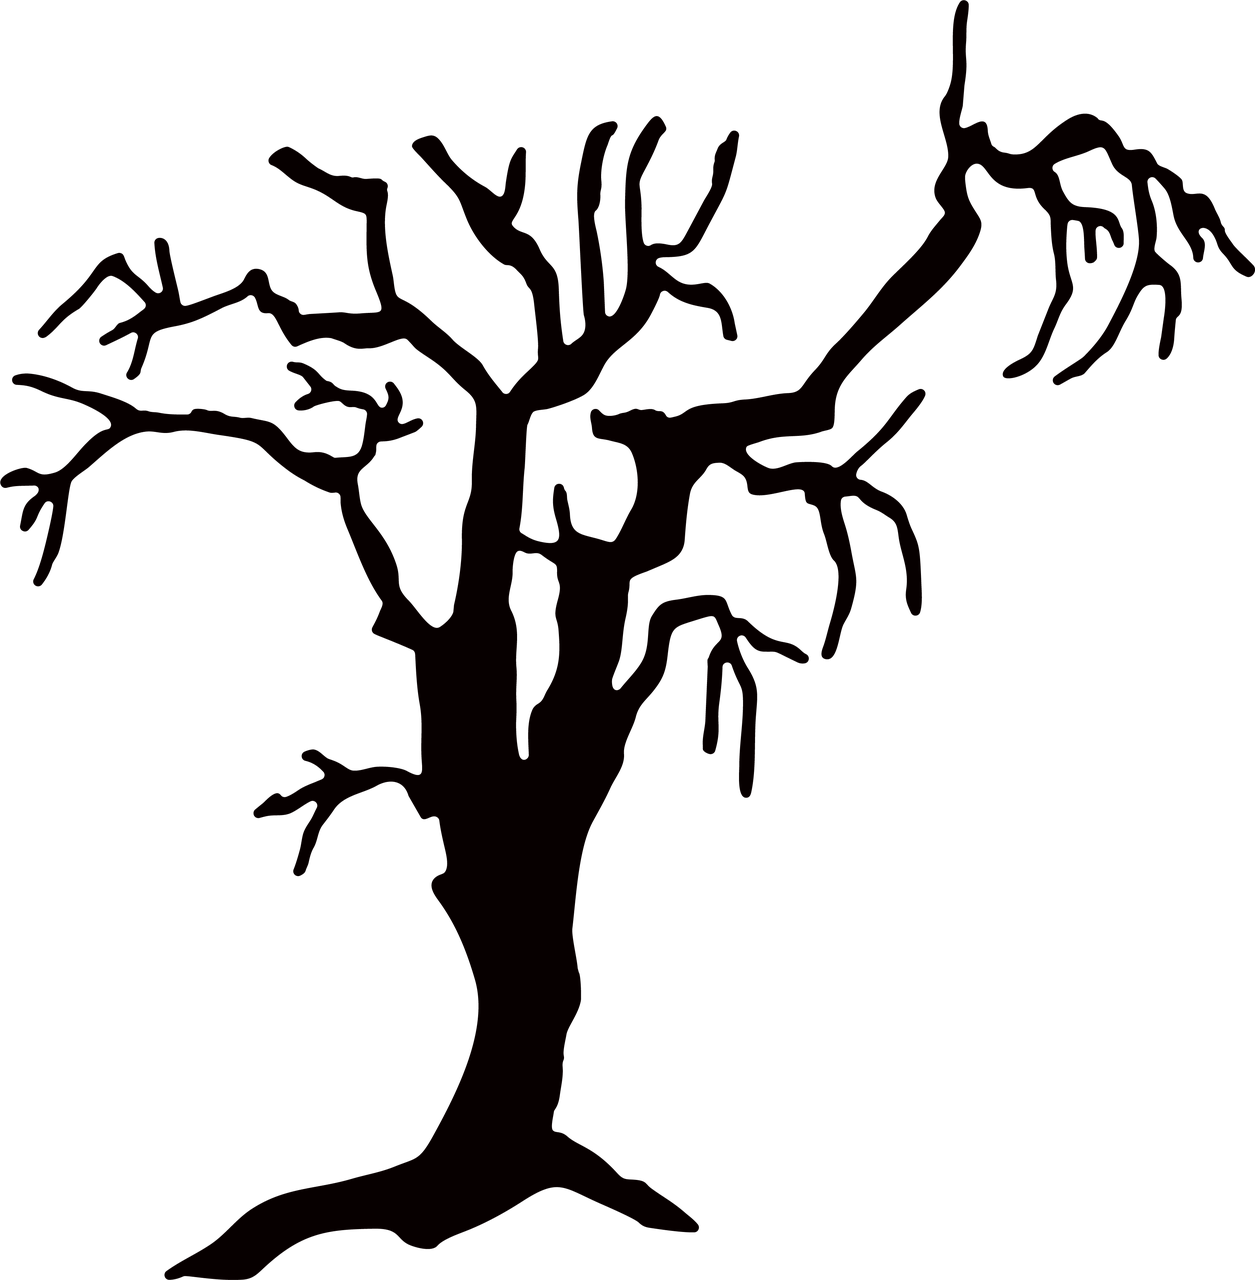 Download Haunted Tree SVG Cut File - Snap Click Supply Co.